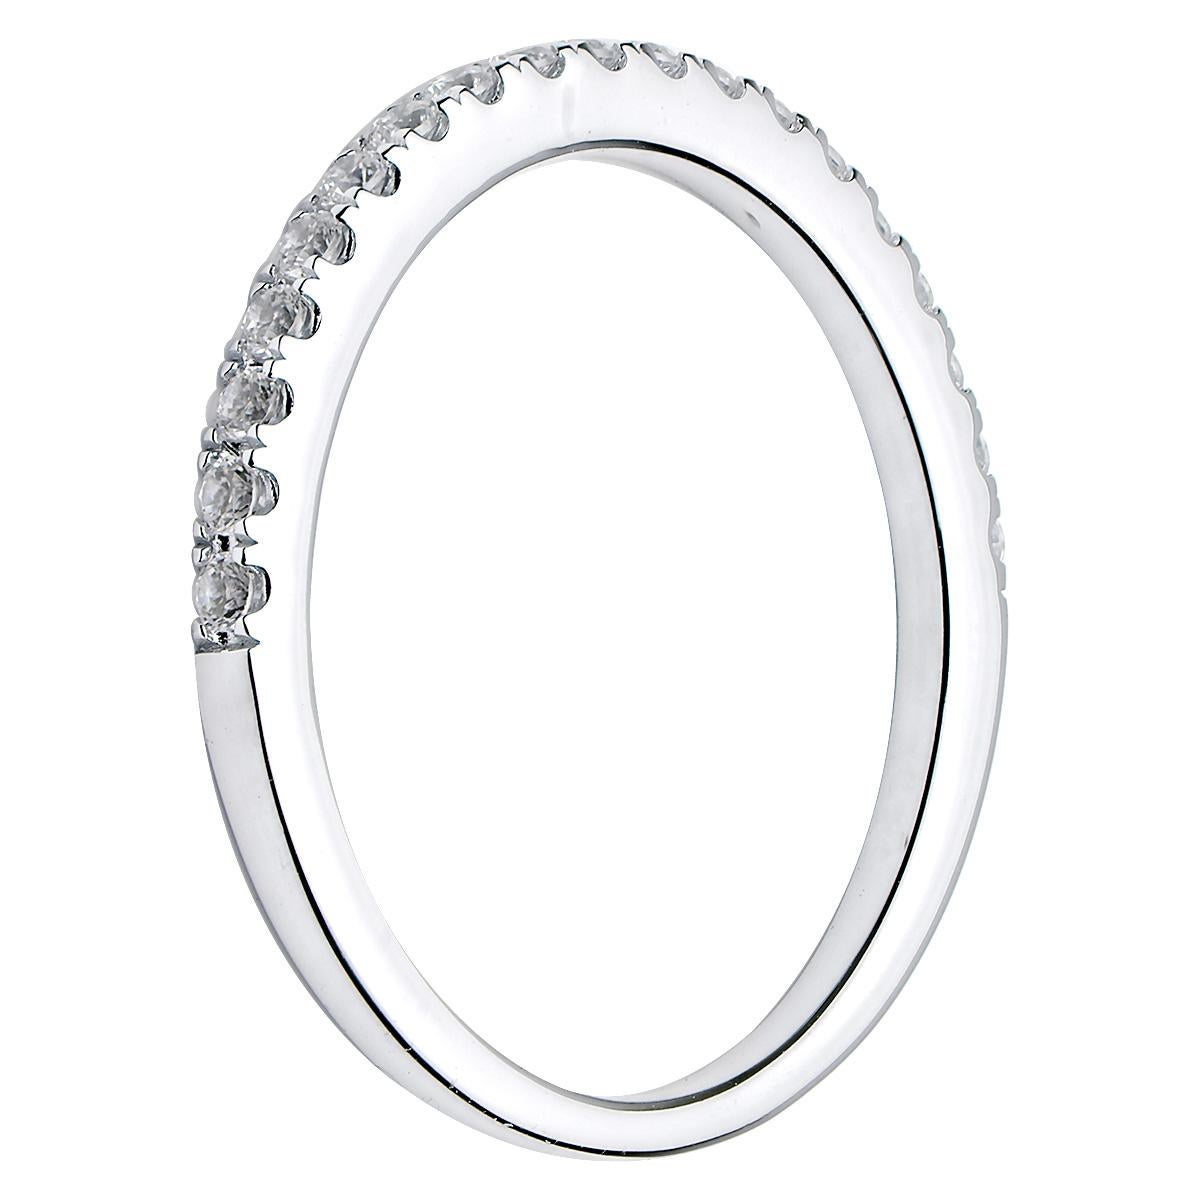 This beautiful simple and classic band has 19 round VS2, G color diamonds that are set halfway around the band. The band is made from 1.7 grams of 18 karat white gold and has lovely prong details. This ring is size 6.